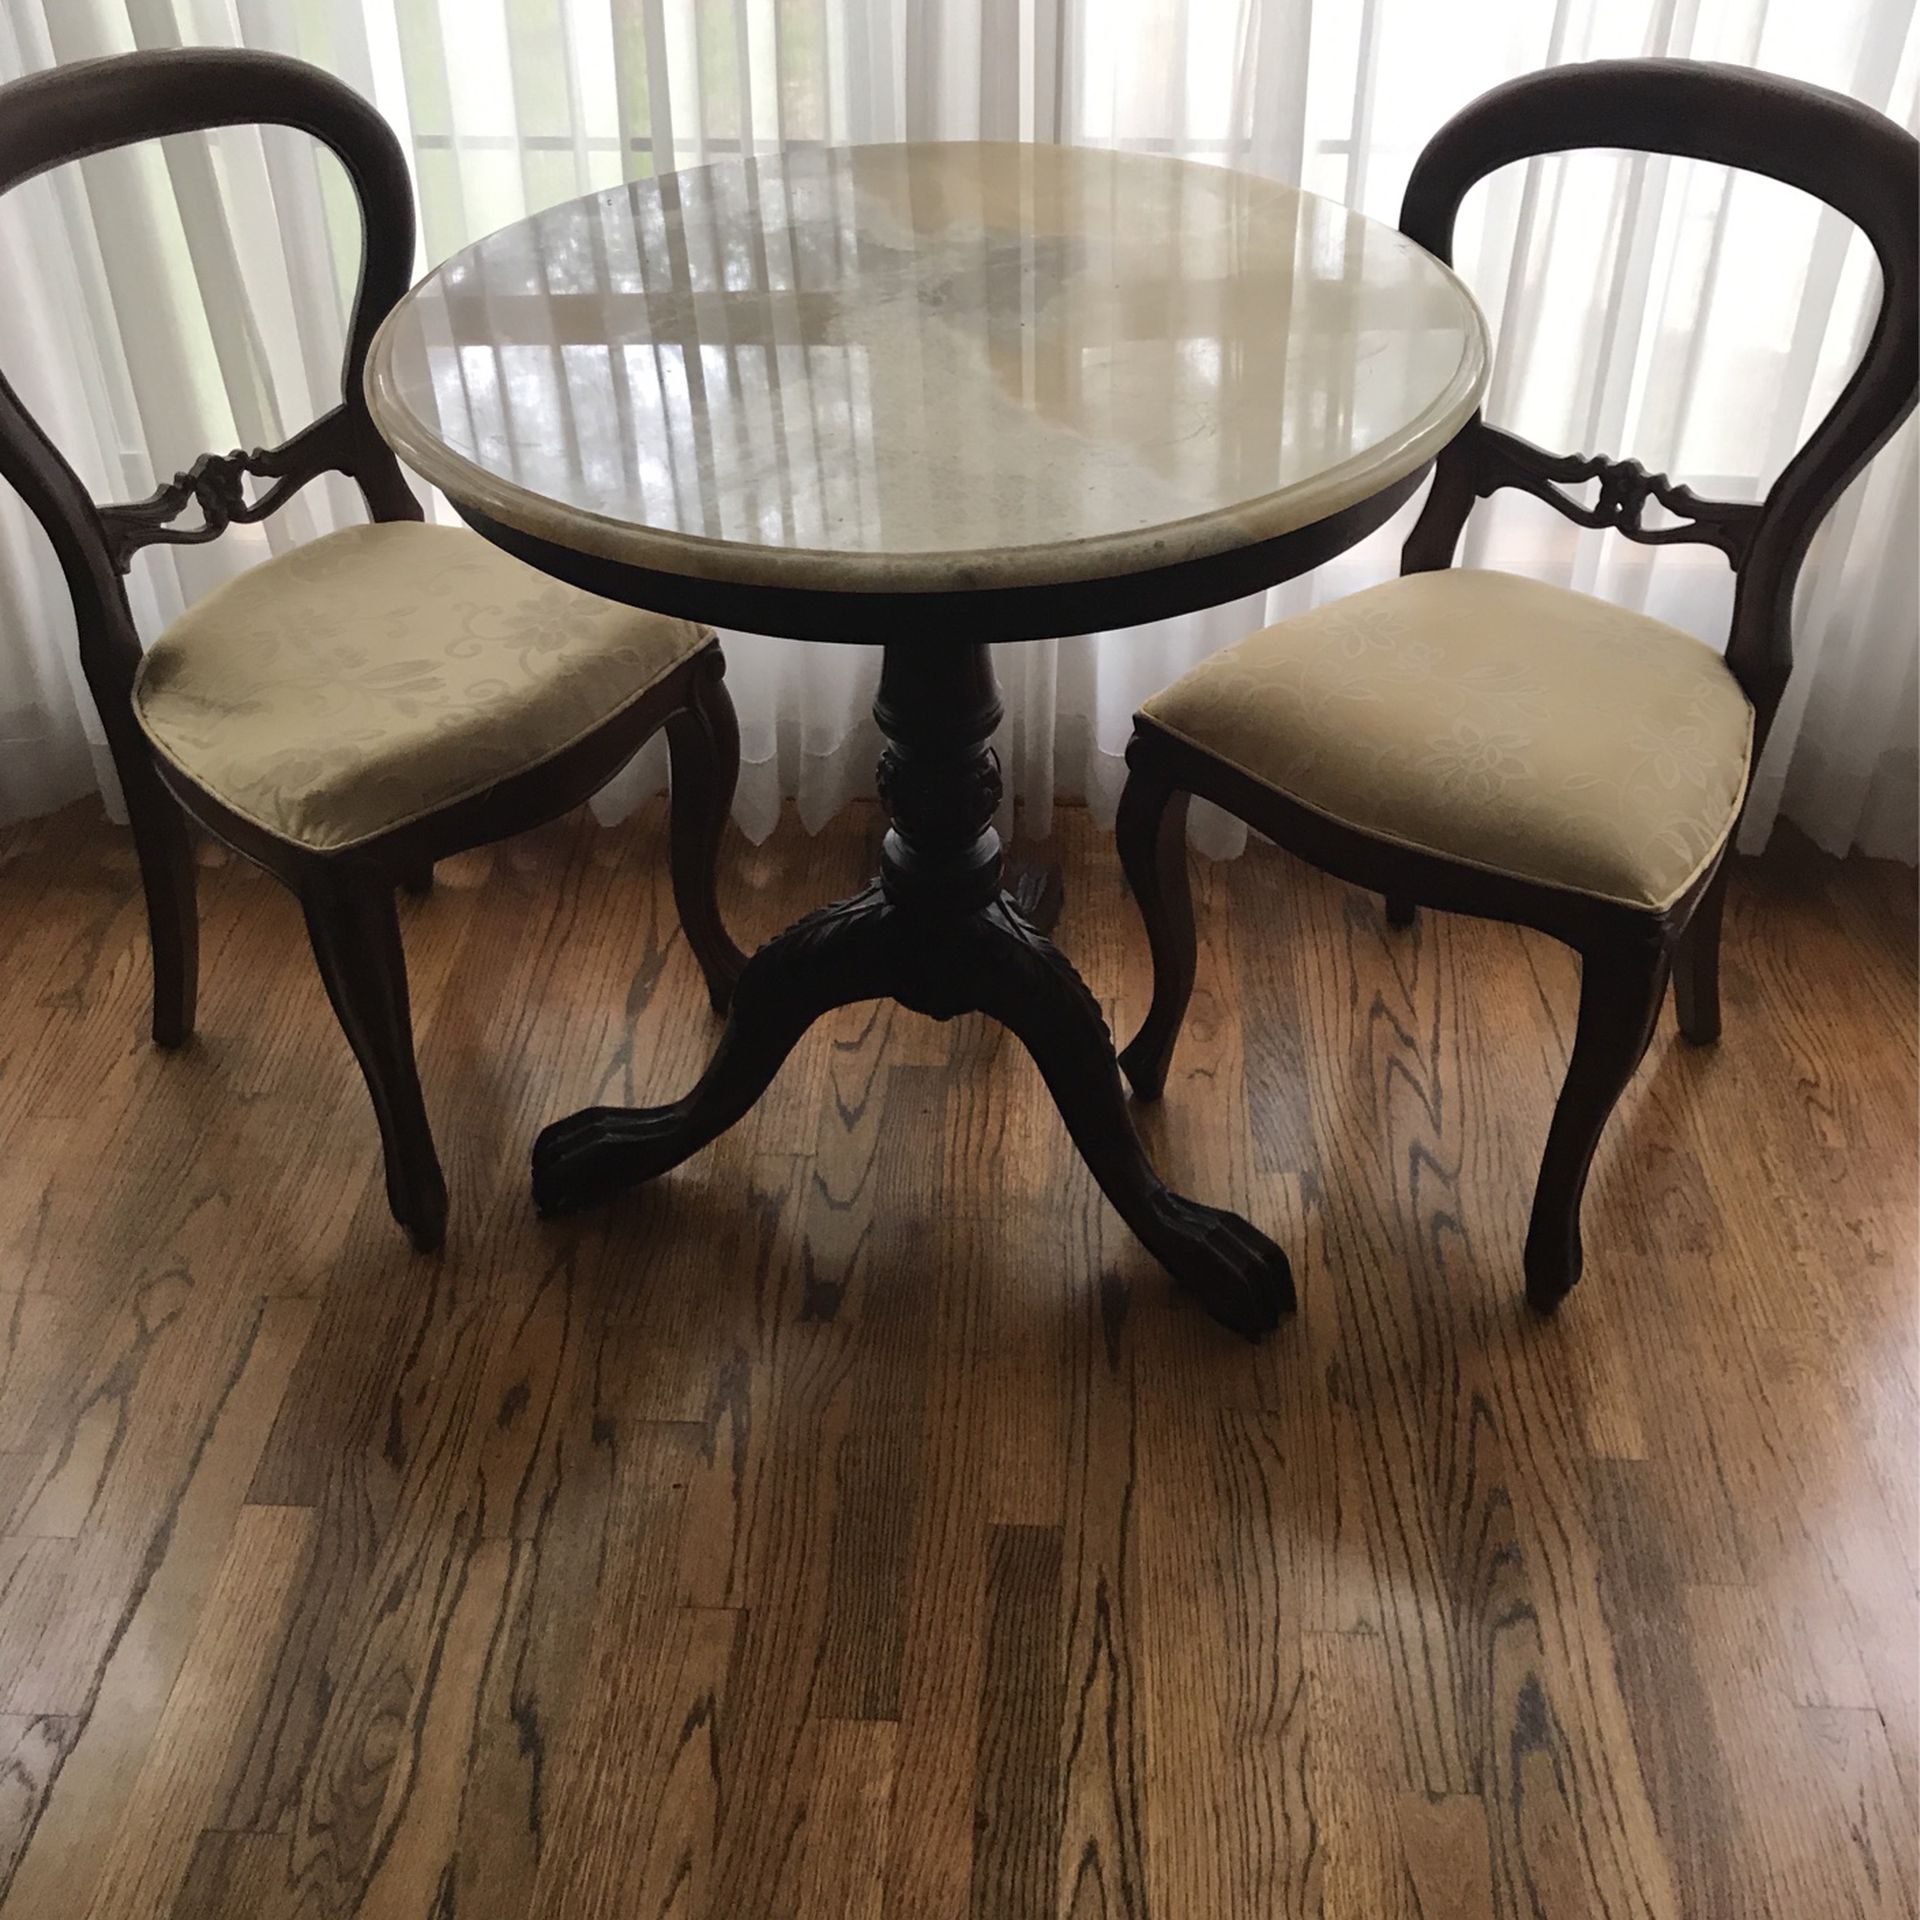 Antique Marble Top Table And Chairs